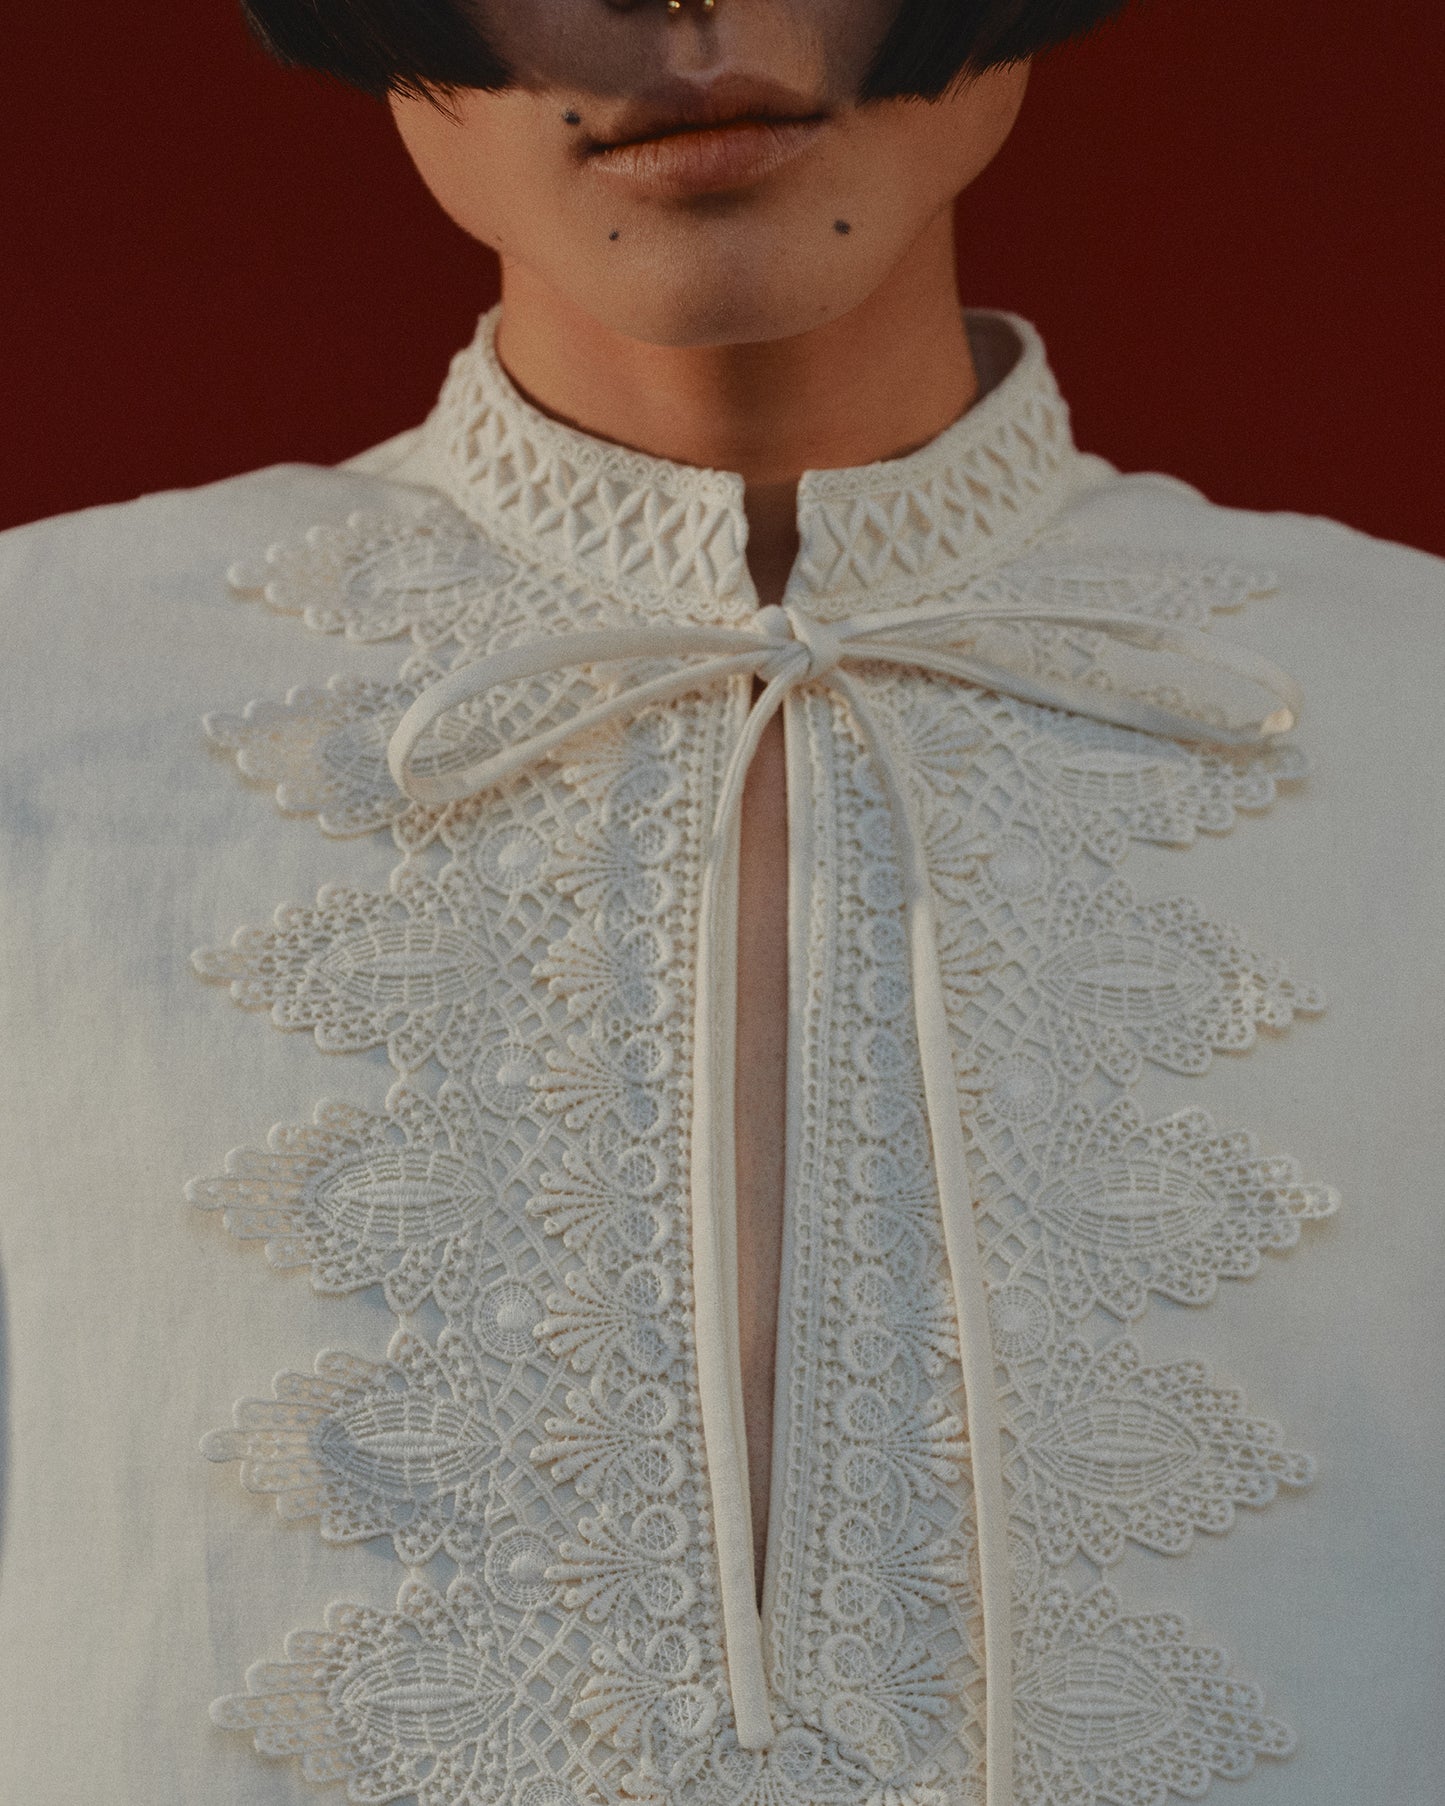 Generated lace blouse